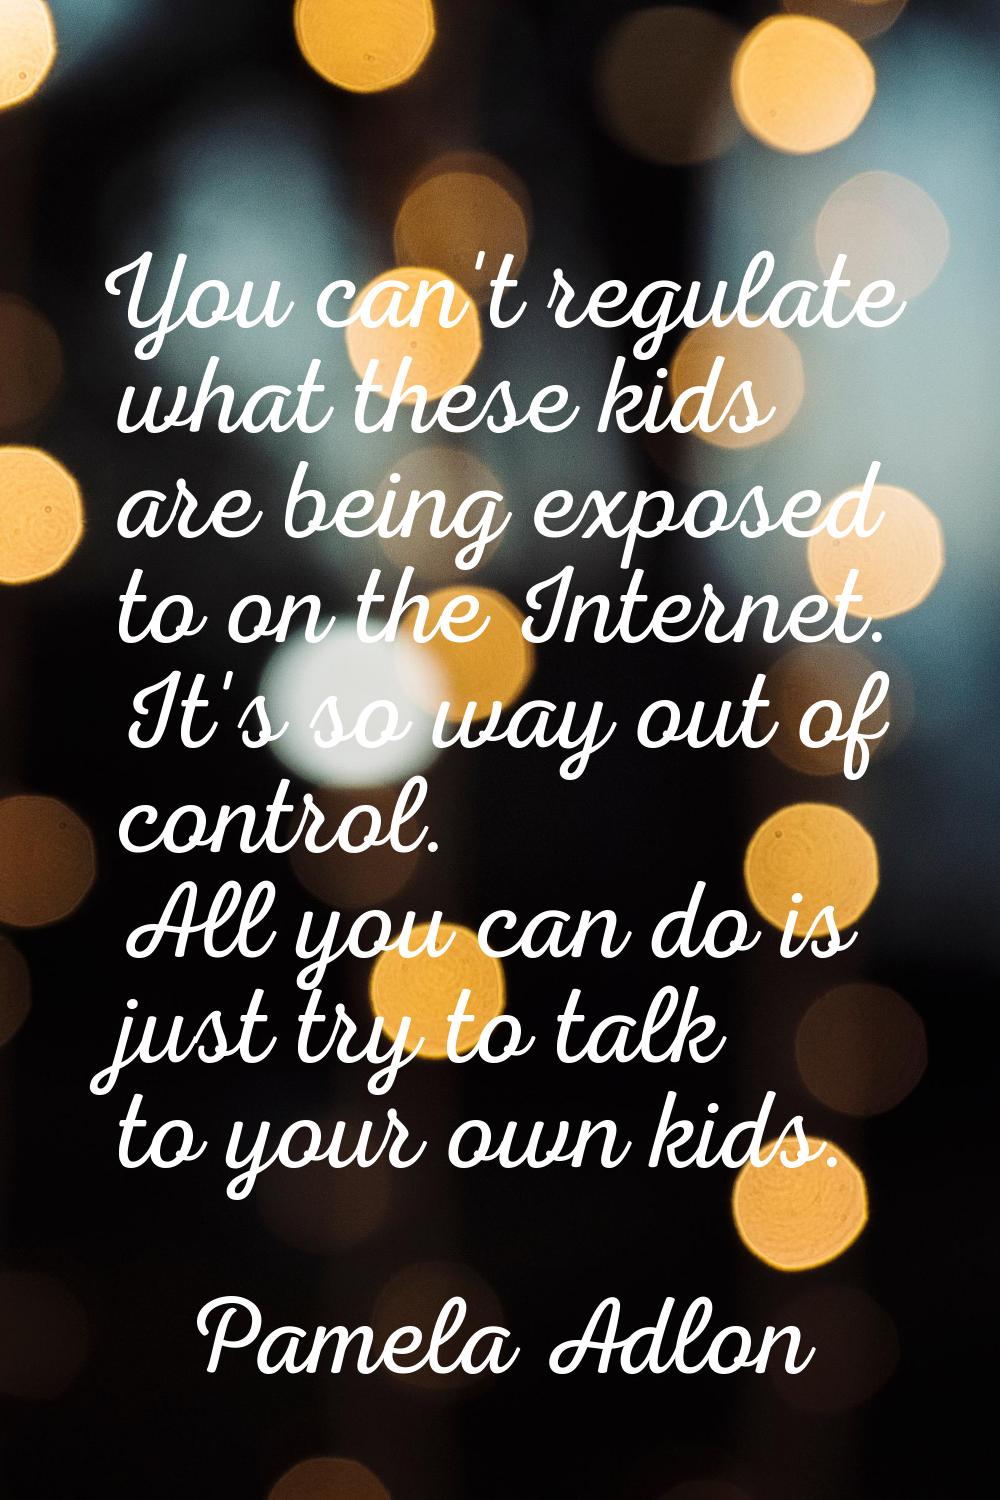 You can't regulate what these kids are being exposed to on the Internet. It's so way out of control